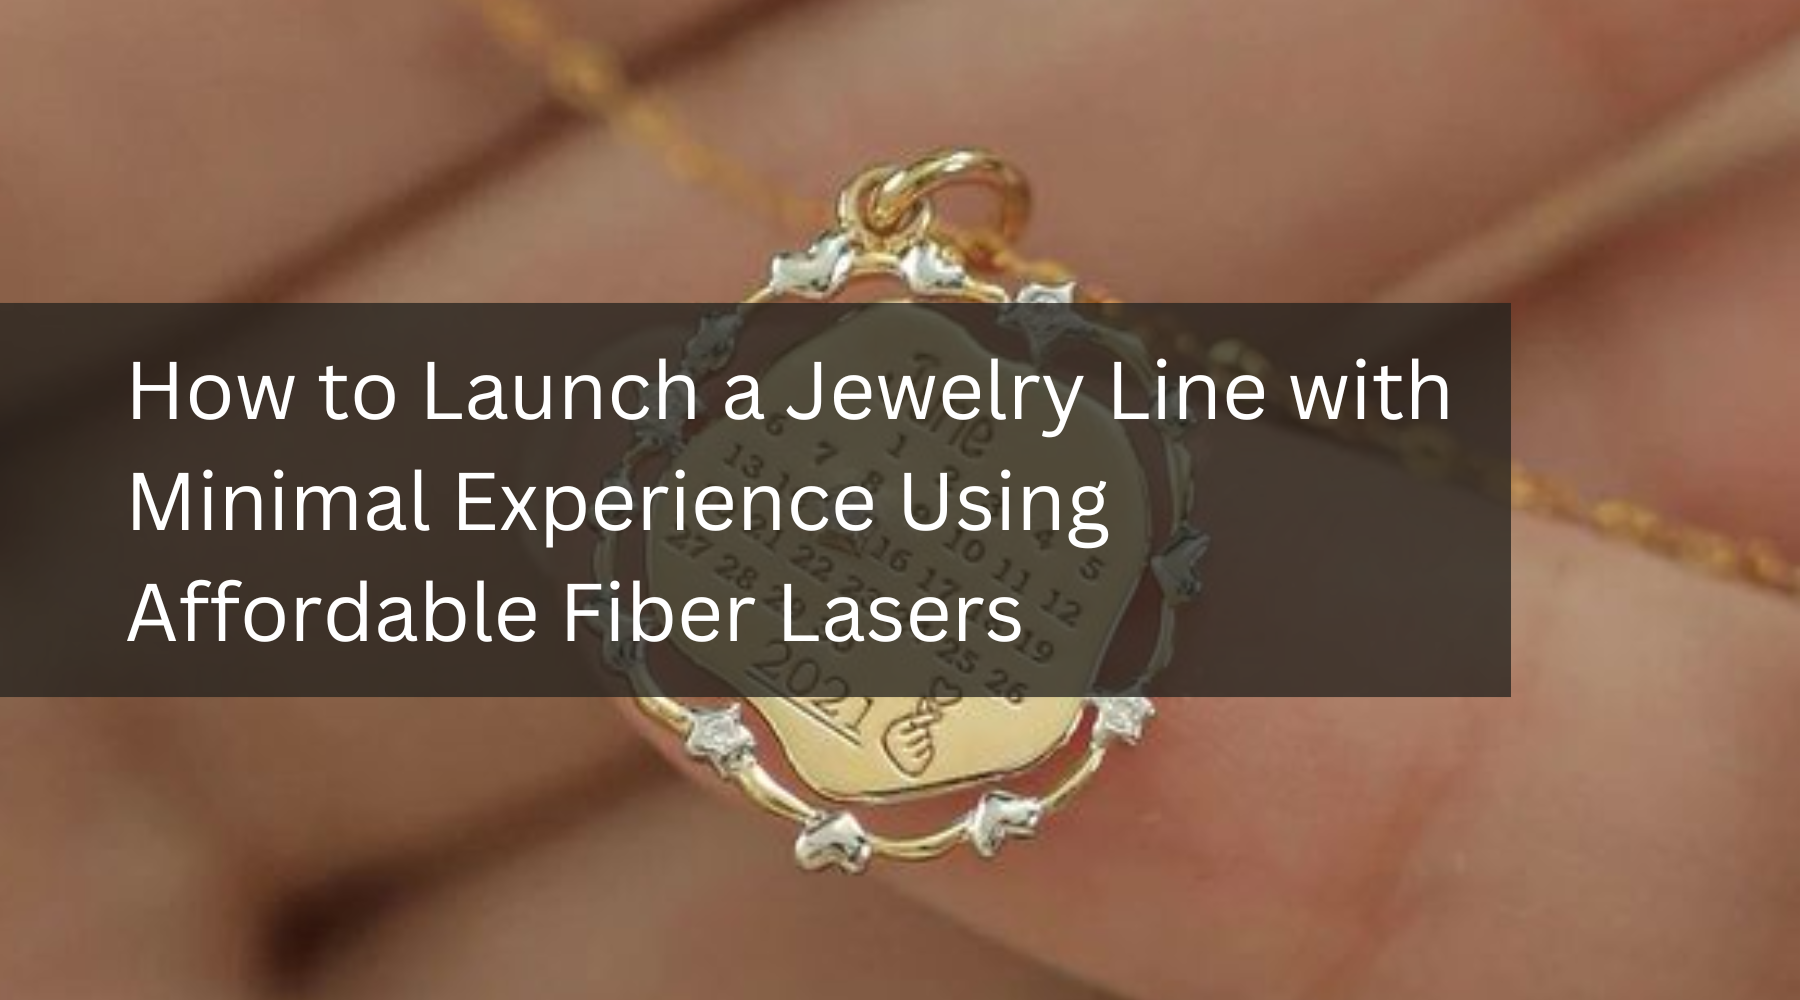 How to Launch a Jewelry Line with Minimal Experience Using Affordable Fiber Lasers